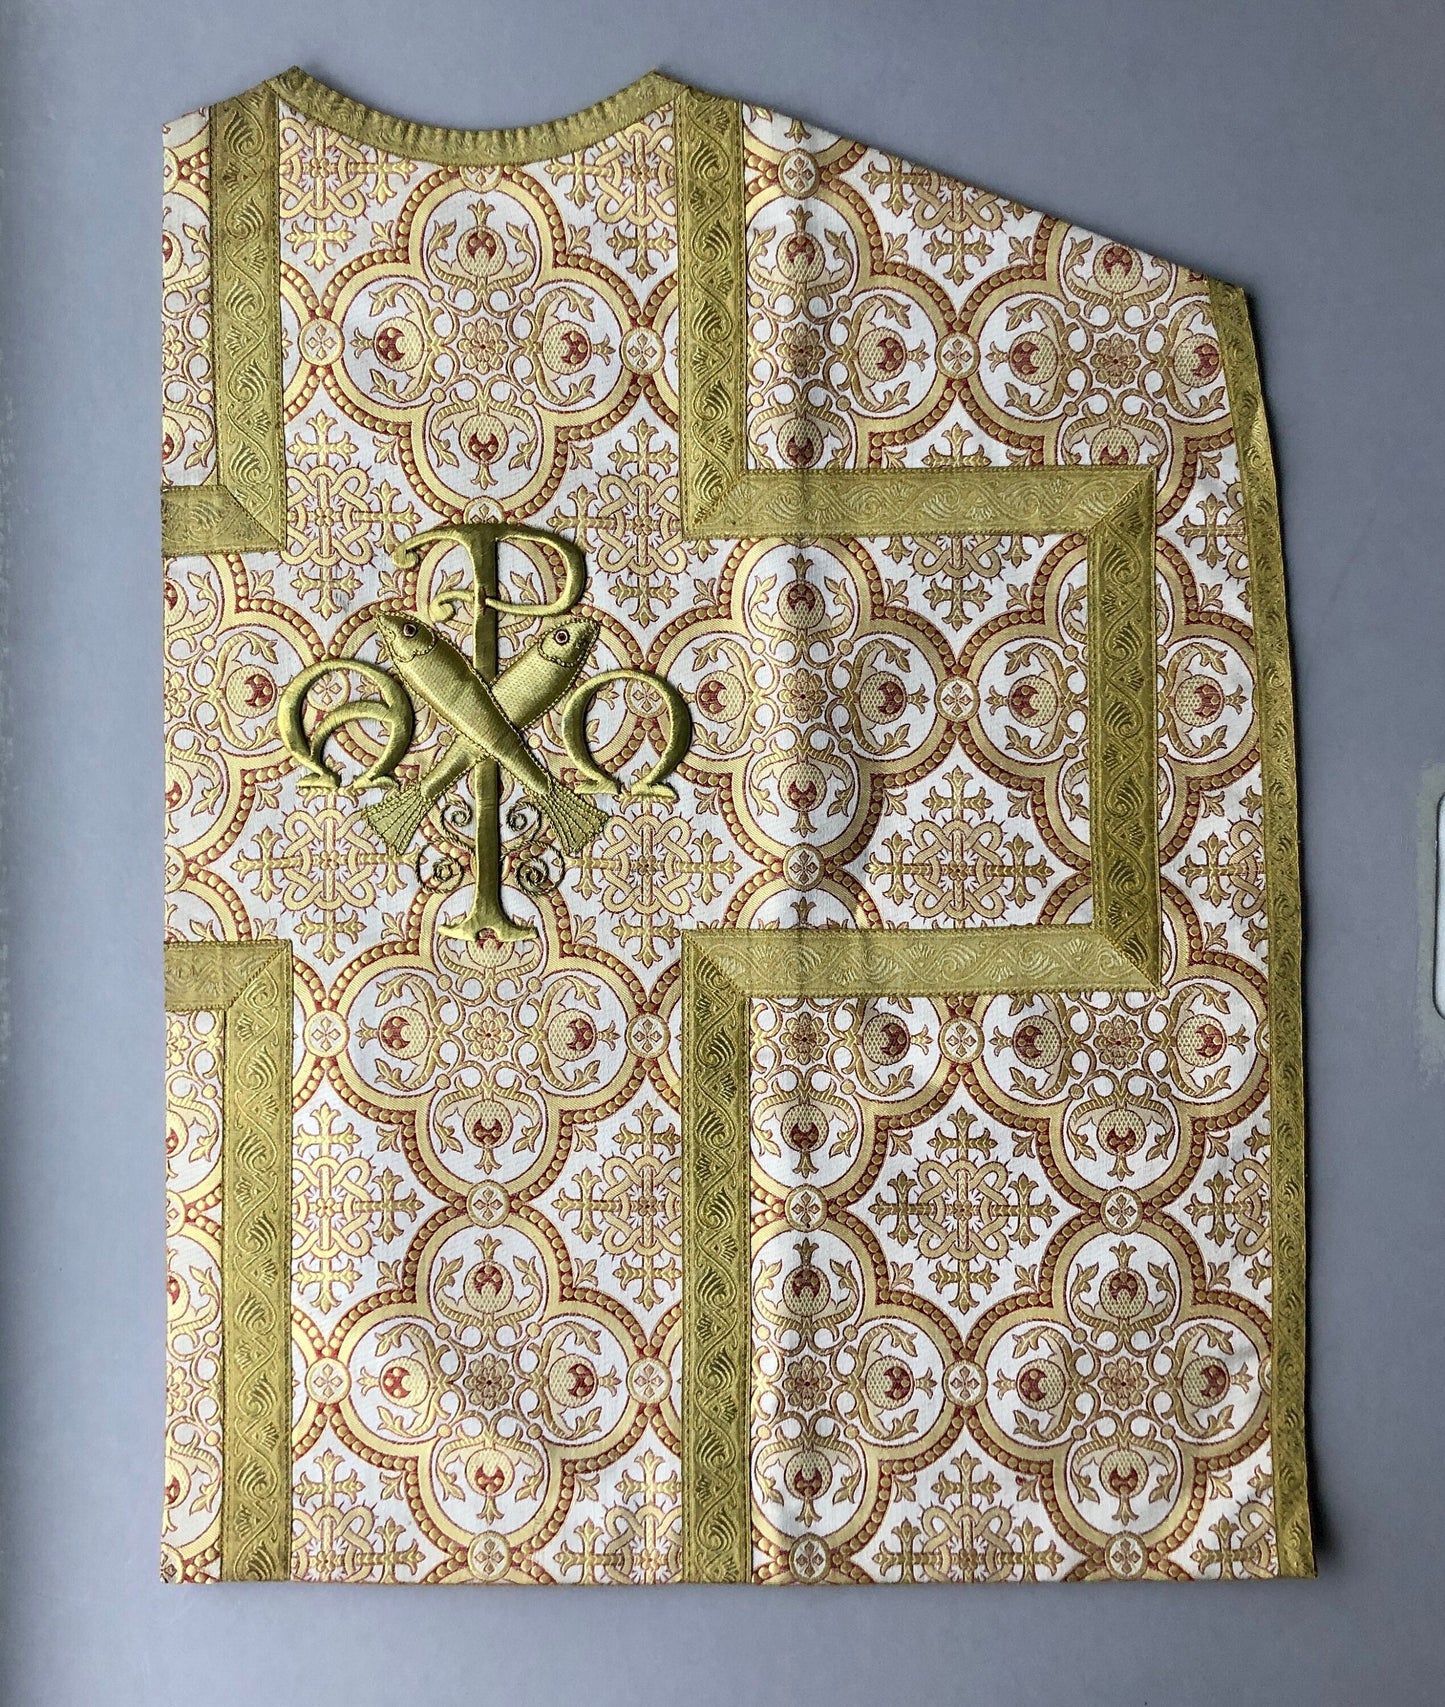 A Textile Sample From Lyon, France. Design For a Chasuble. Heavily Embroidered With Gold Thread. Late 19th Century. Size: 60.5 x 46 cms.